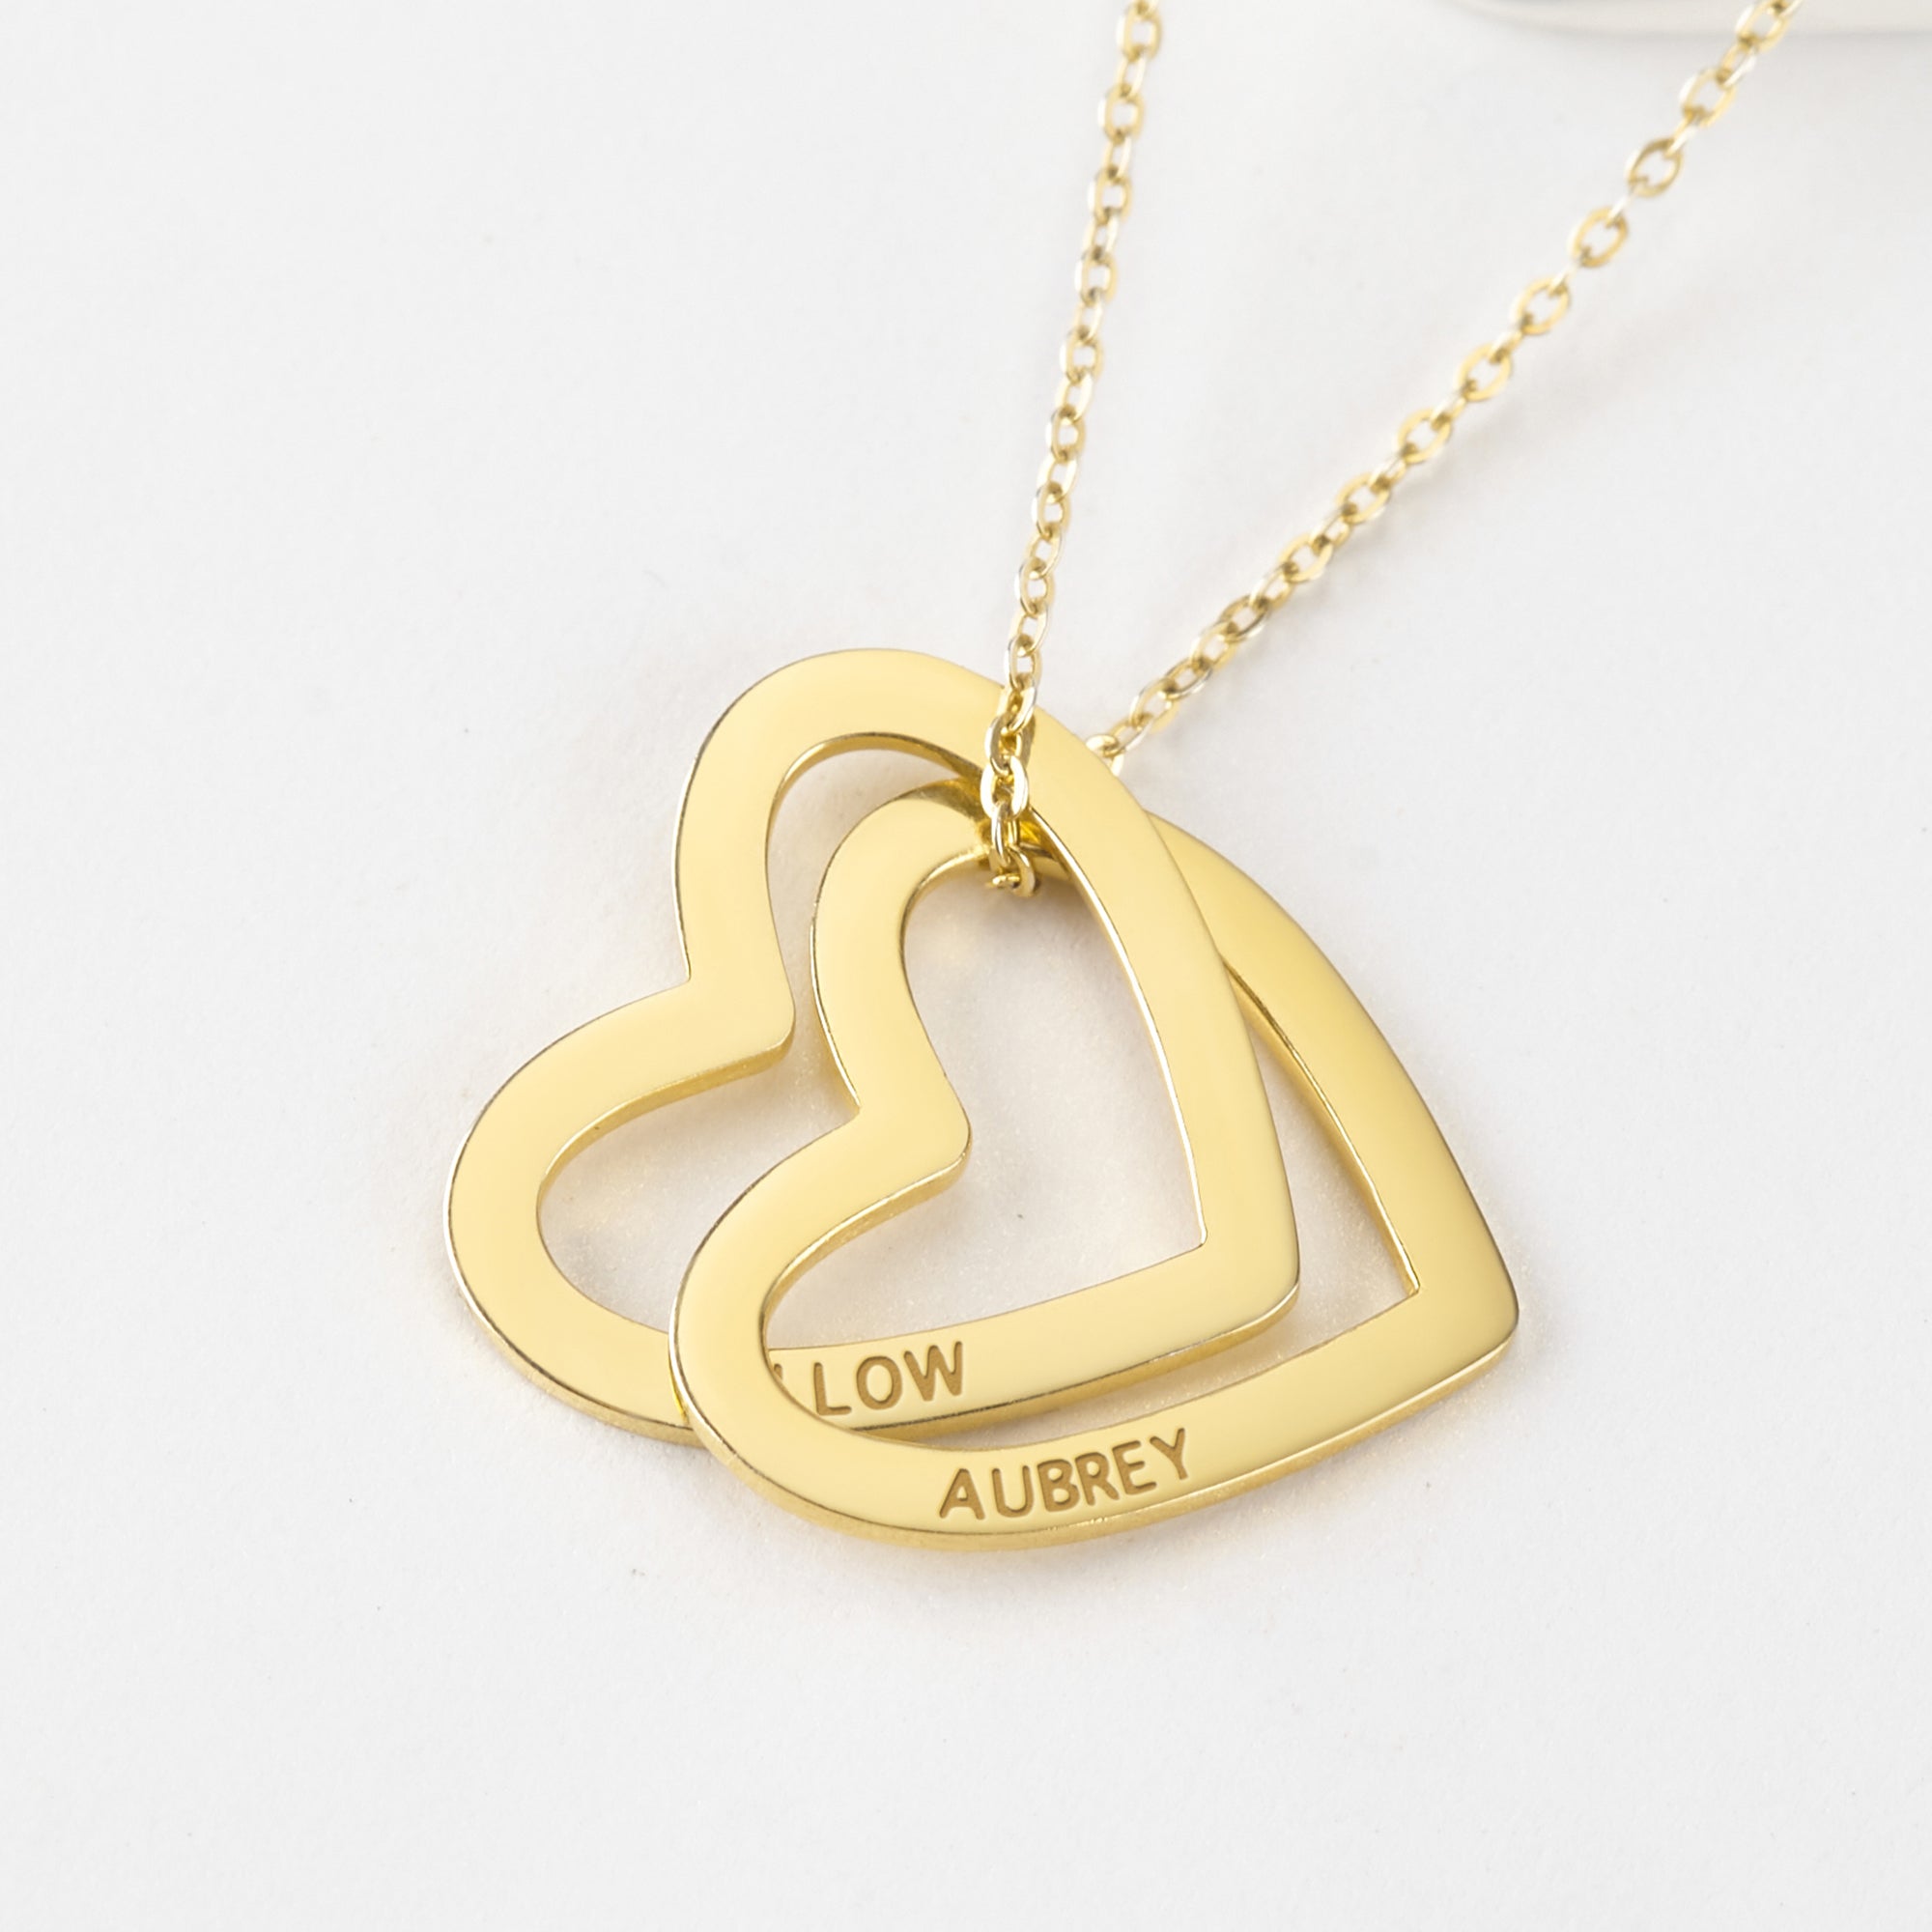 Personalized 3-Heart Necklace for Mom or Grandma | Engraved with Children's Names | Sterling Silver & Gold-Plated - Necklaces - Bijou Her -  -  - 